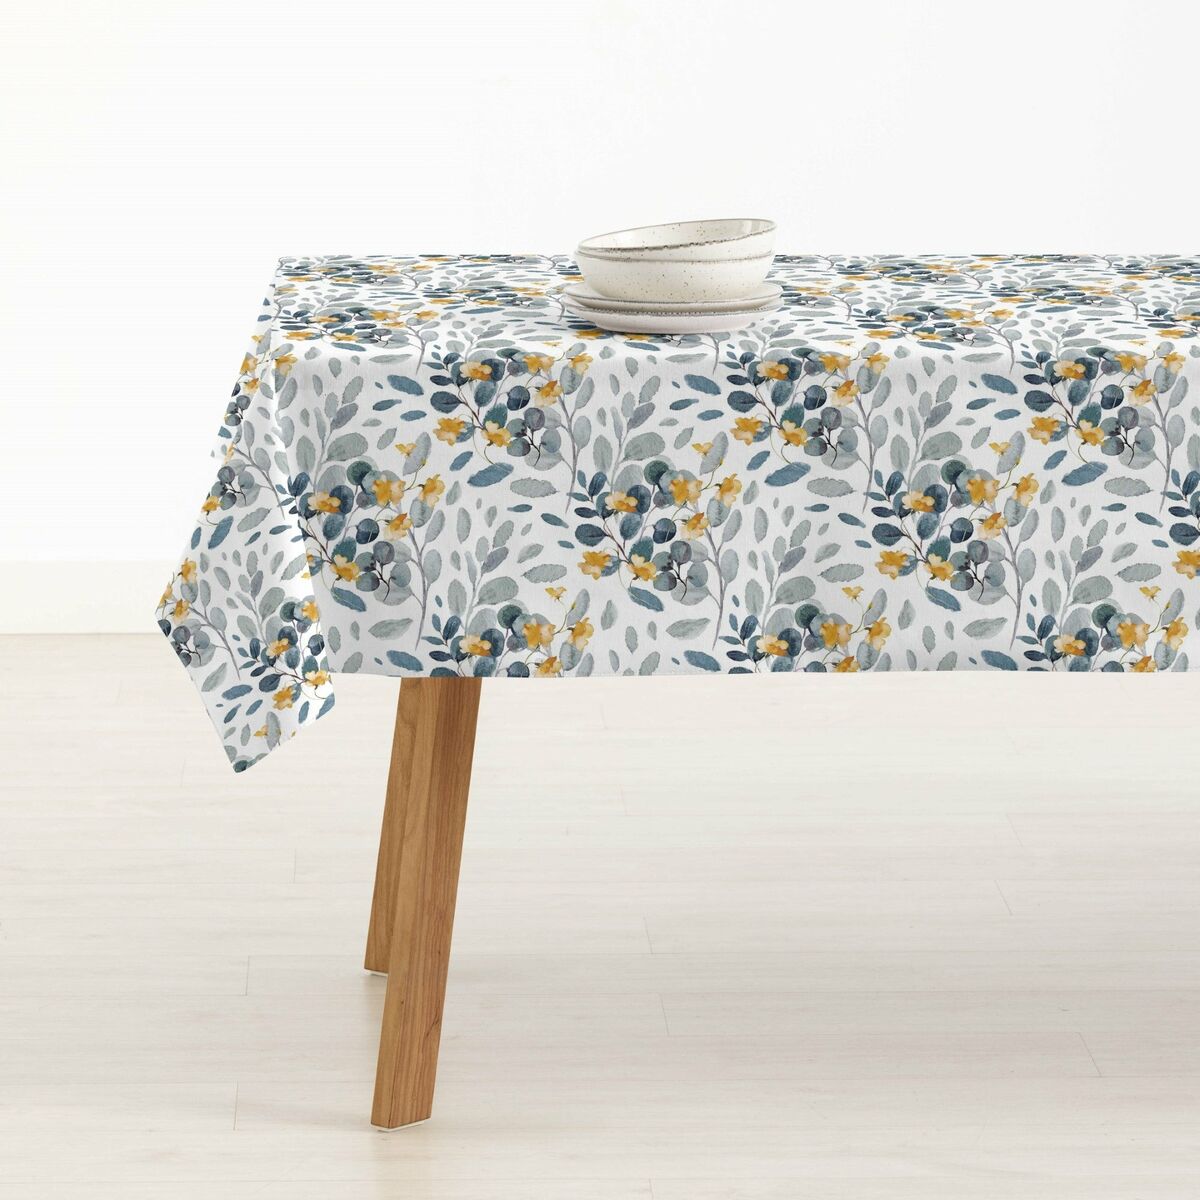 Stain-proof tablecloth Belum 0120-377 300 x 140 cm